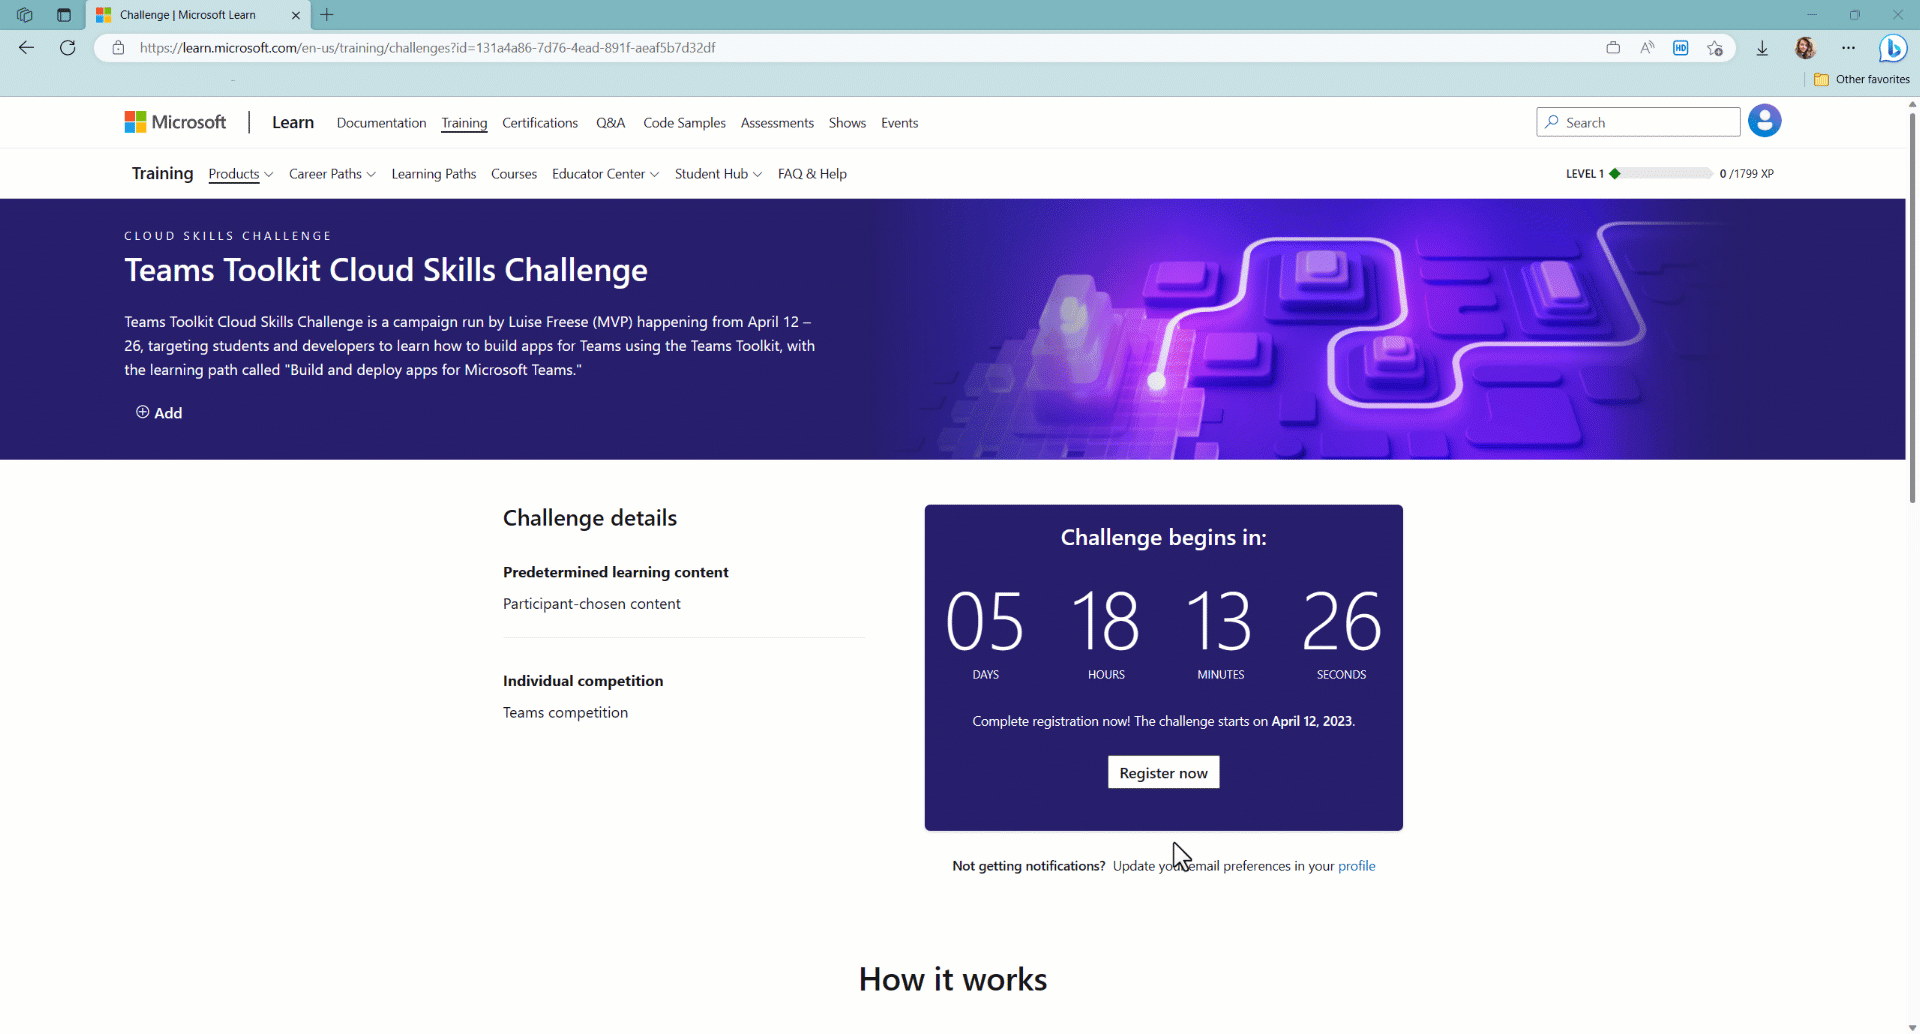  a GIF to show how to correctly register for the cloud skills challenge